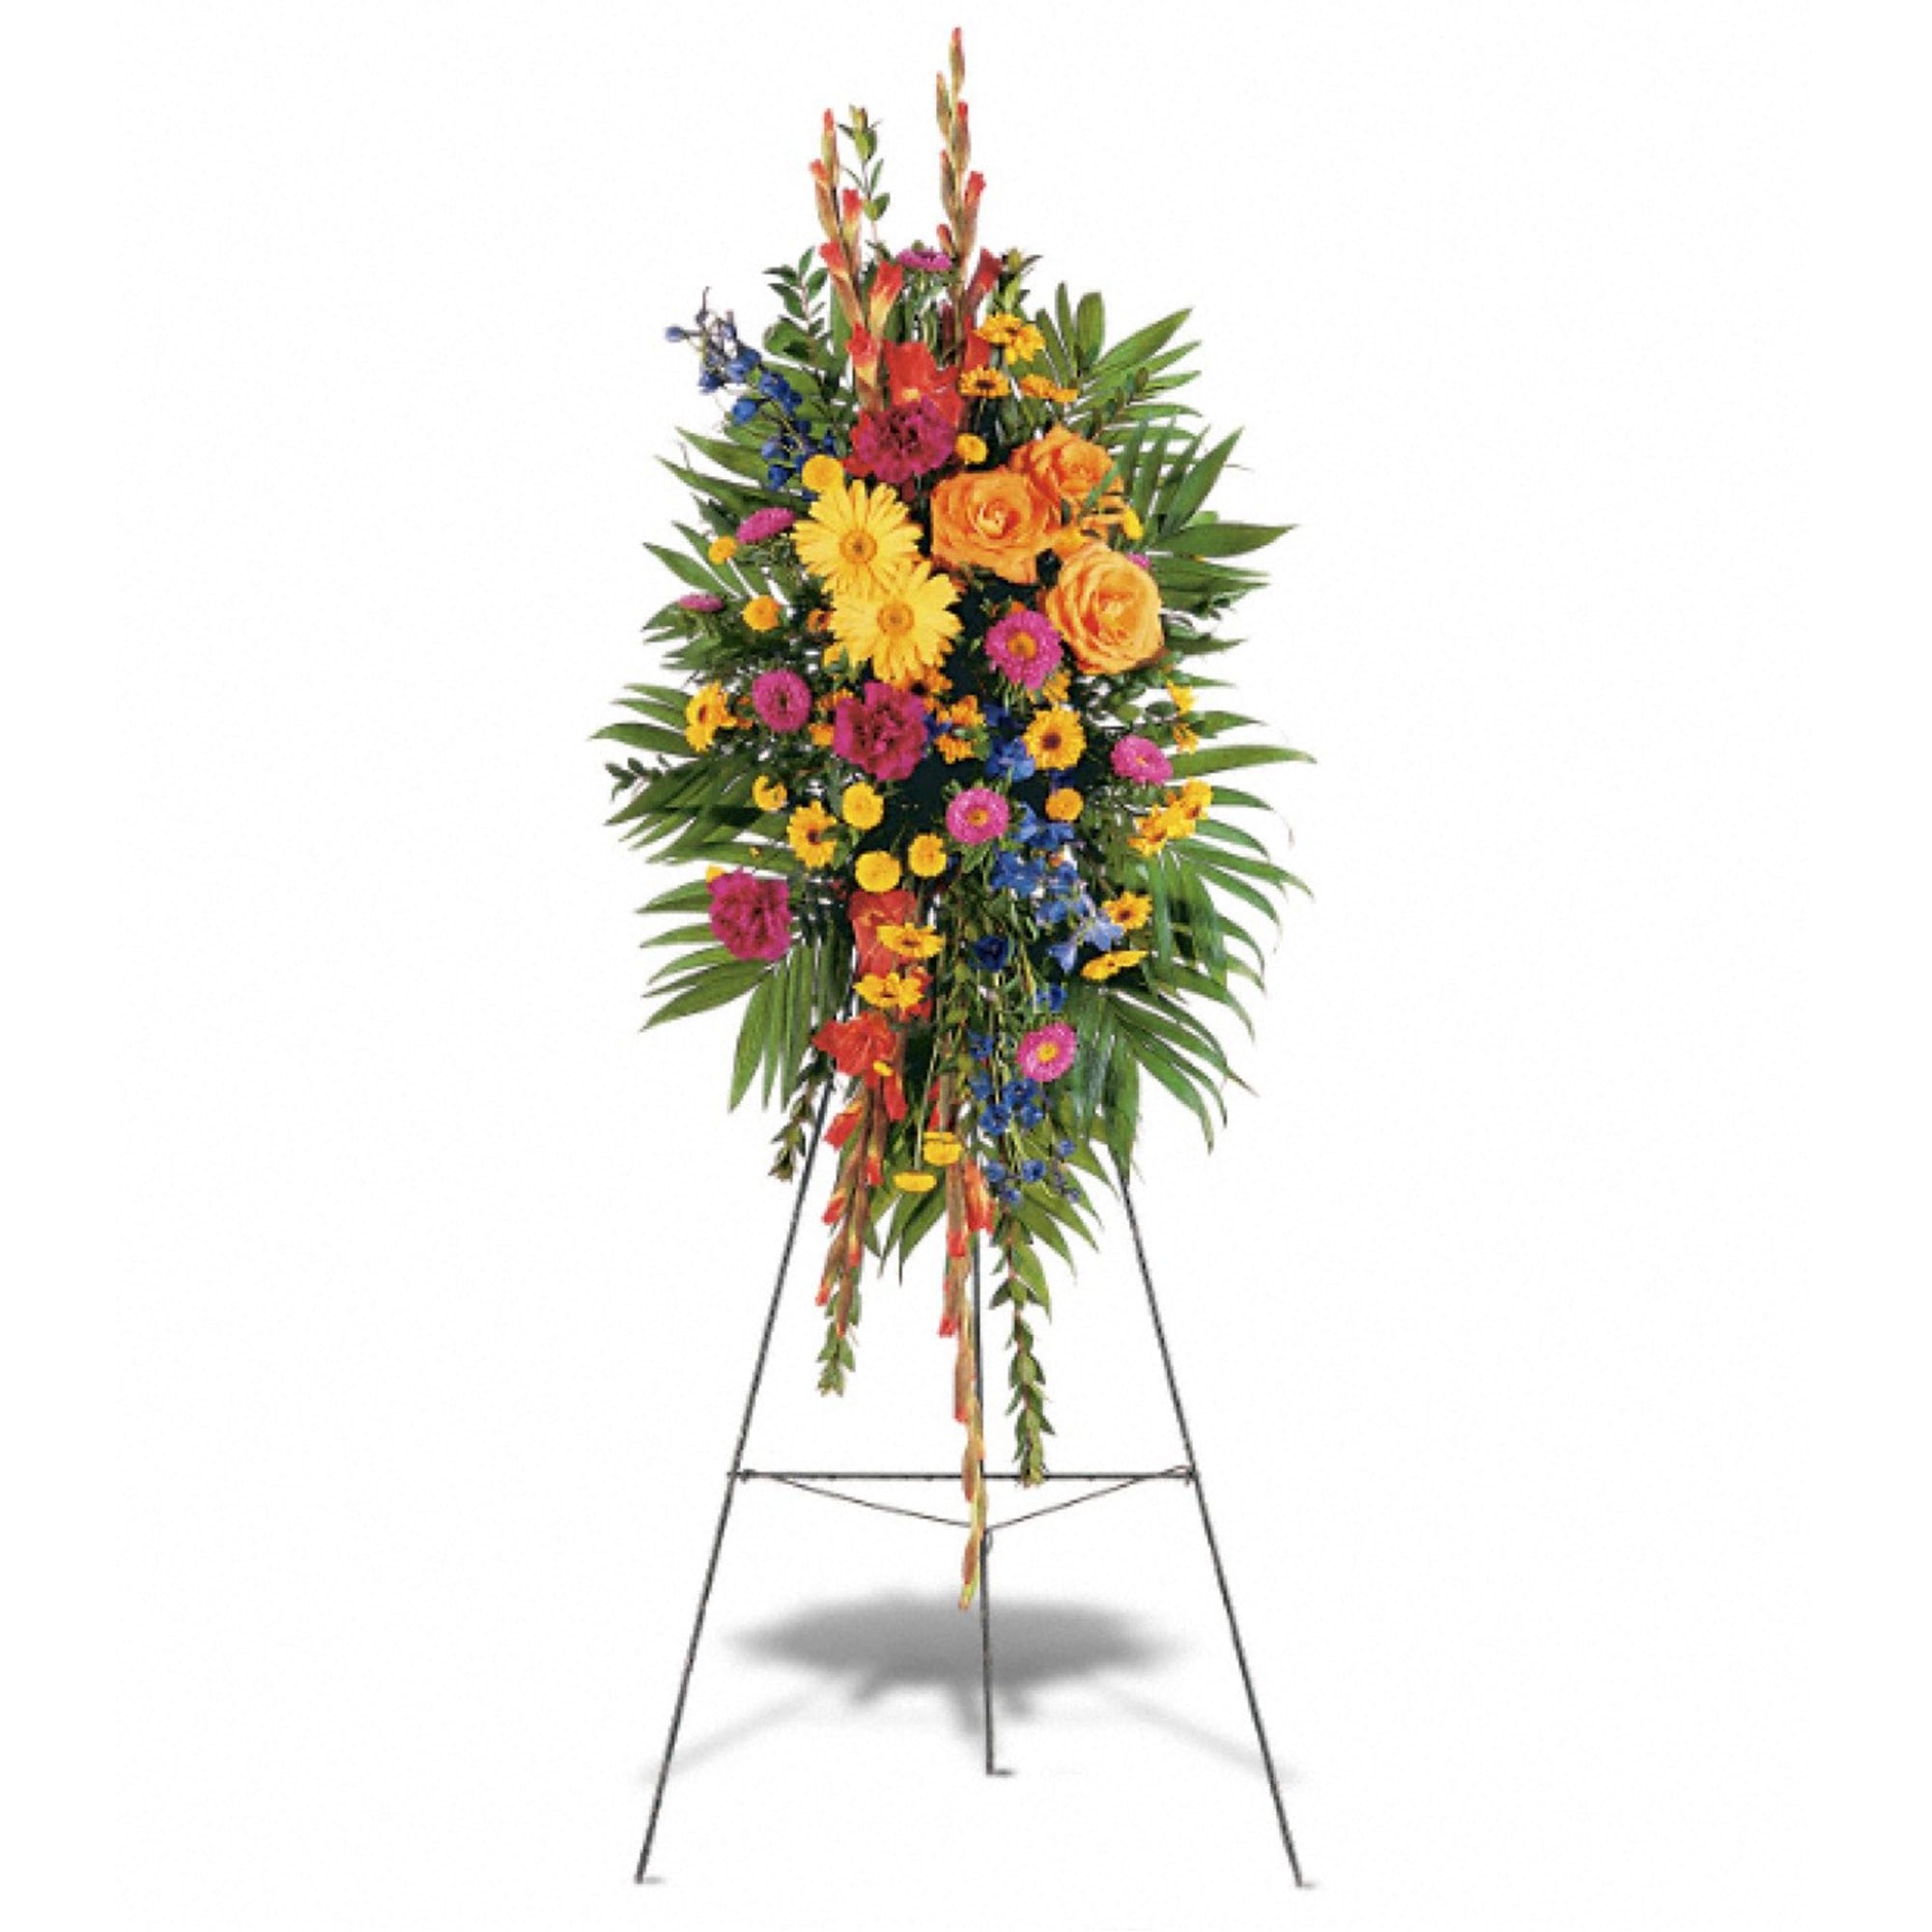 Celebration of Life - One standing spray arrives with orange gladioli and roses, yellow gerberas, hot pink asters and foliage accents on an easel. Approximately 18&quot; W x 46&quot; H. TF203-8 